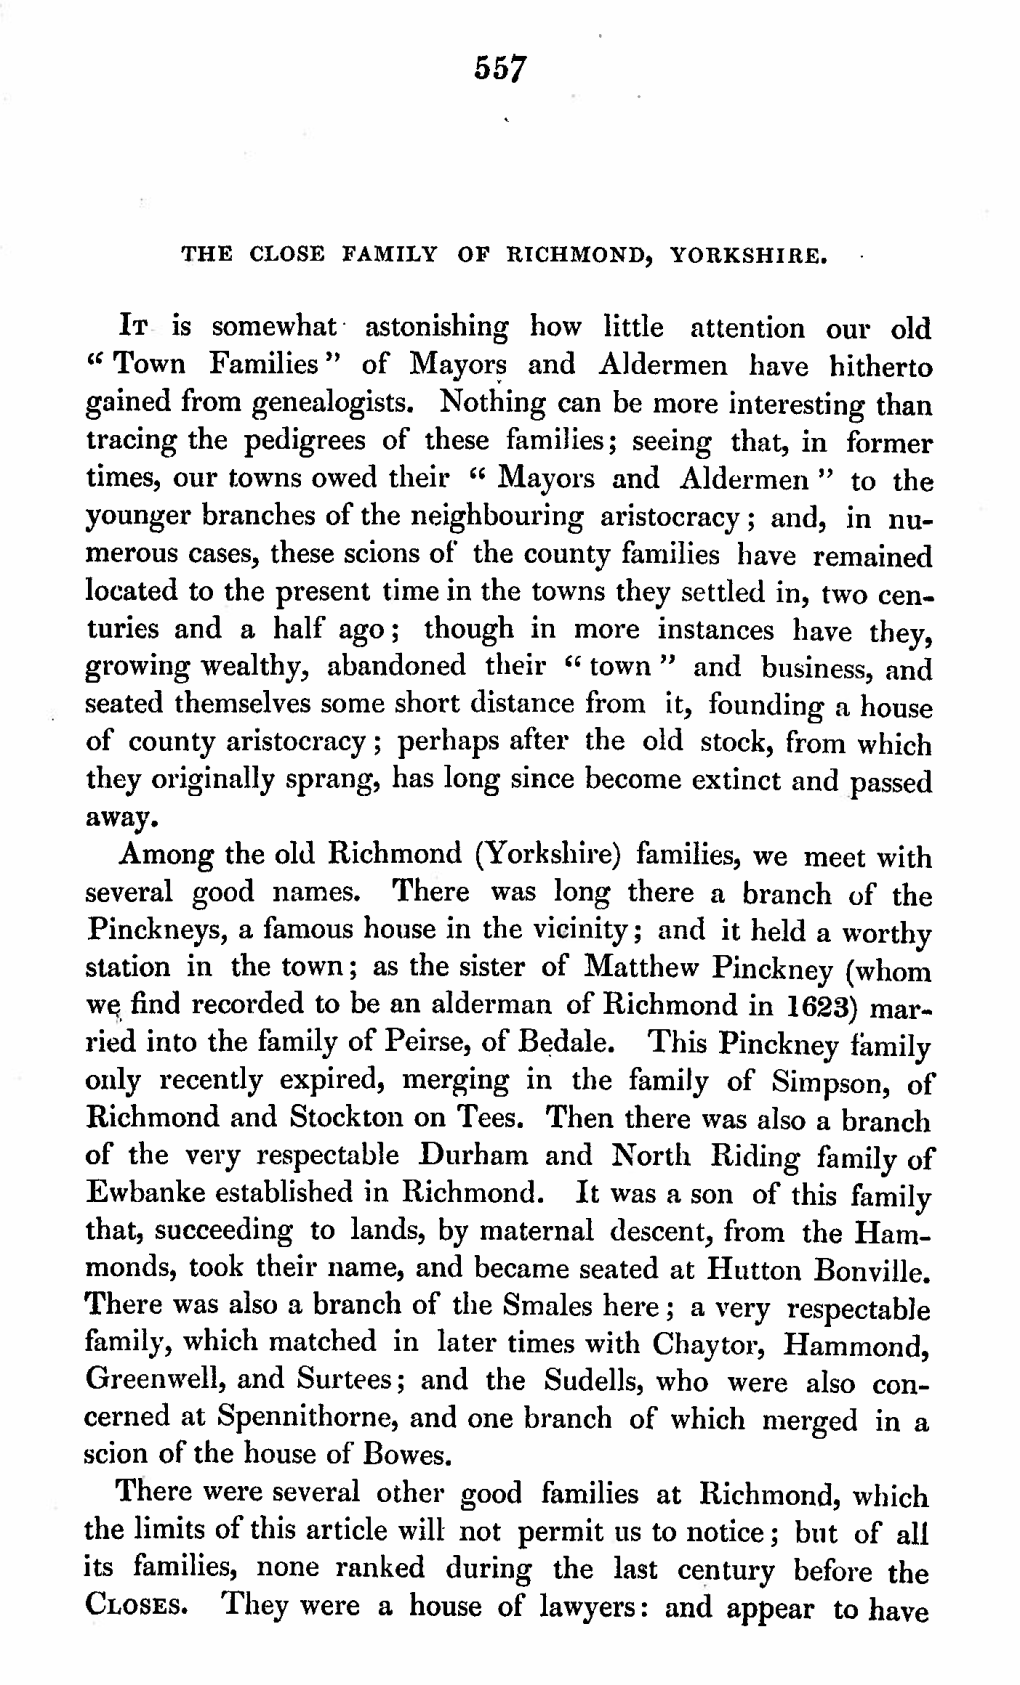 THE CLOSE FAMILY of RICHMOND, YORKSHIRE, IT Is Somewhat· Astonishing How Little Attention Our Old " Town Families